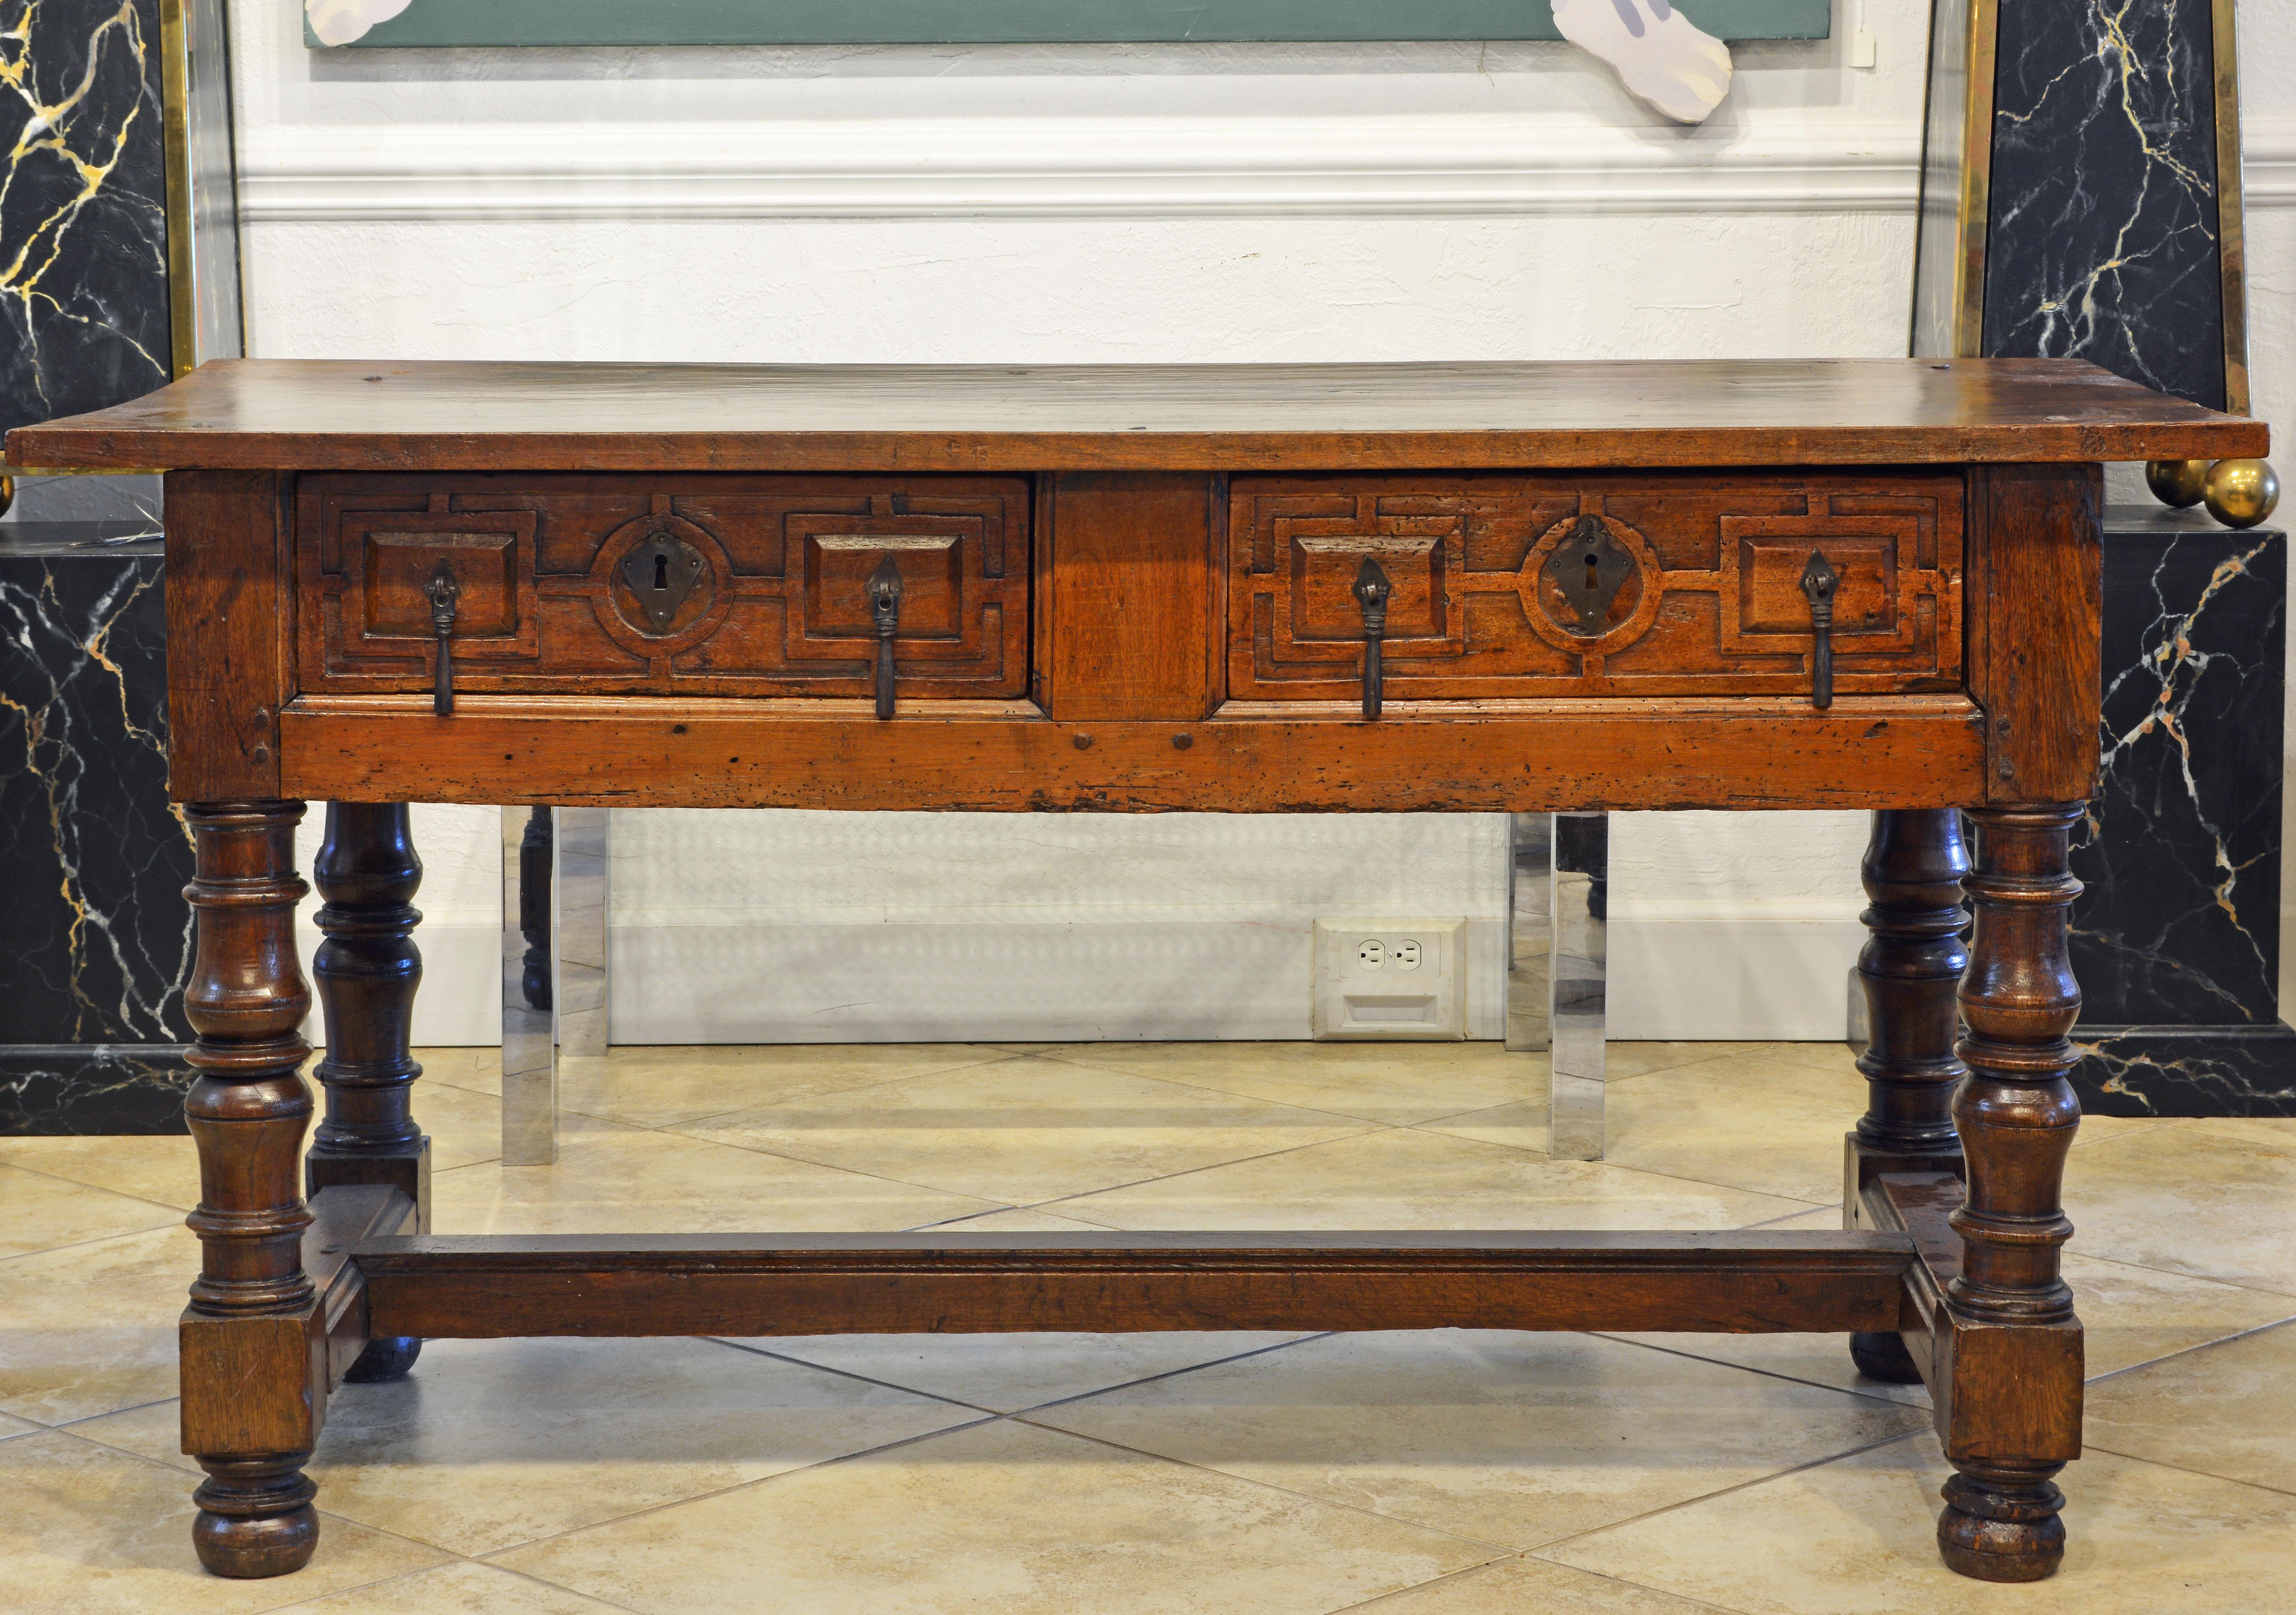 This excellent and impressive Renaissance table features a single board walnut top with visible nailheads above a carved oakwood frame holding two carved drawers with original hardware and resting on carved and turned legs united by low stretchers.